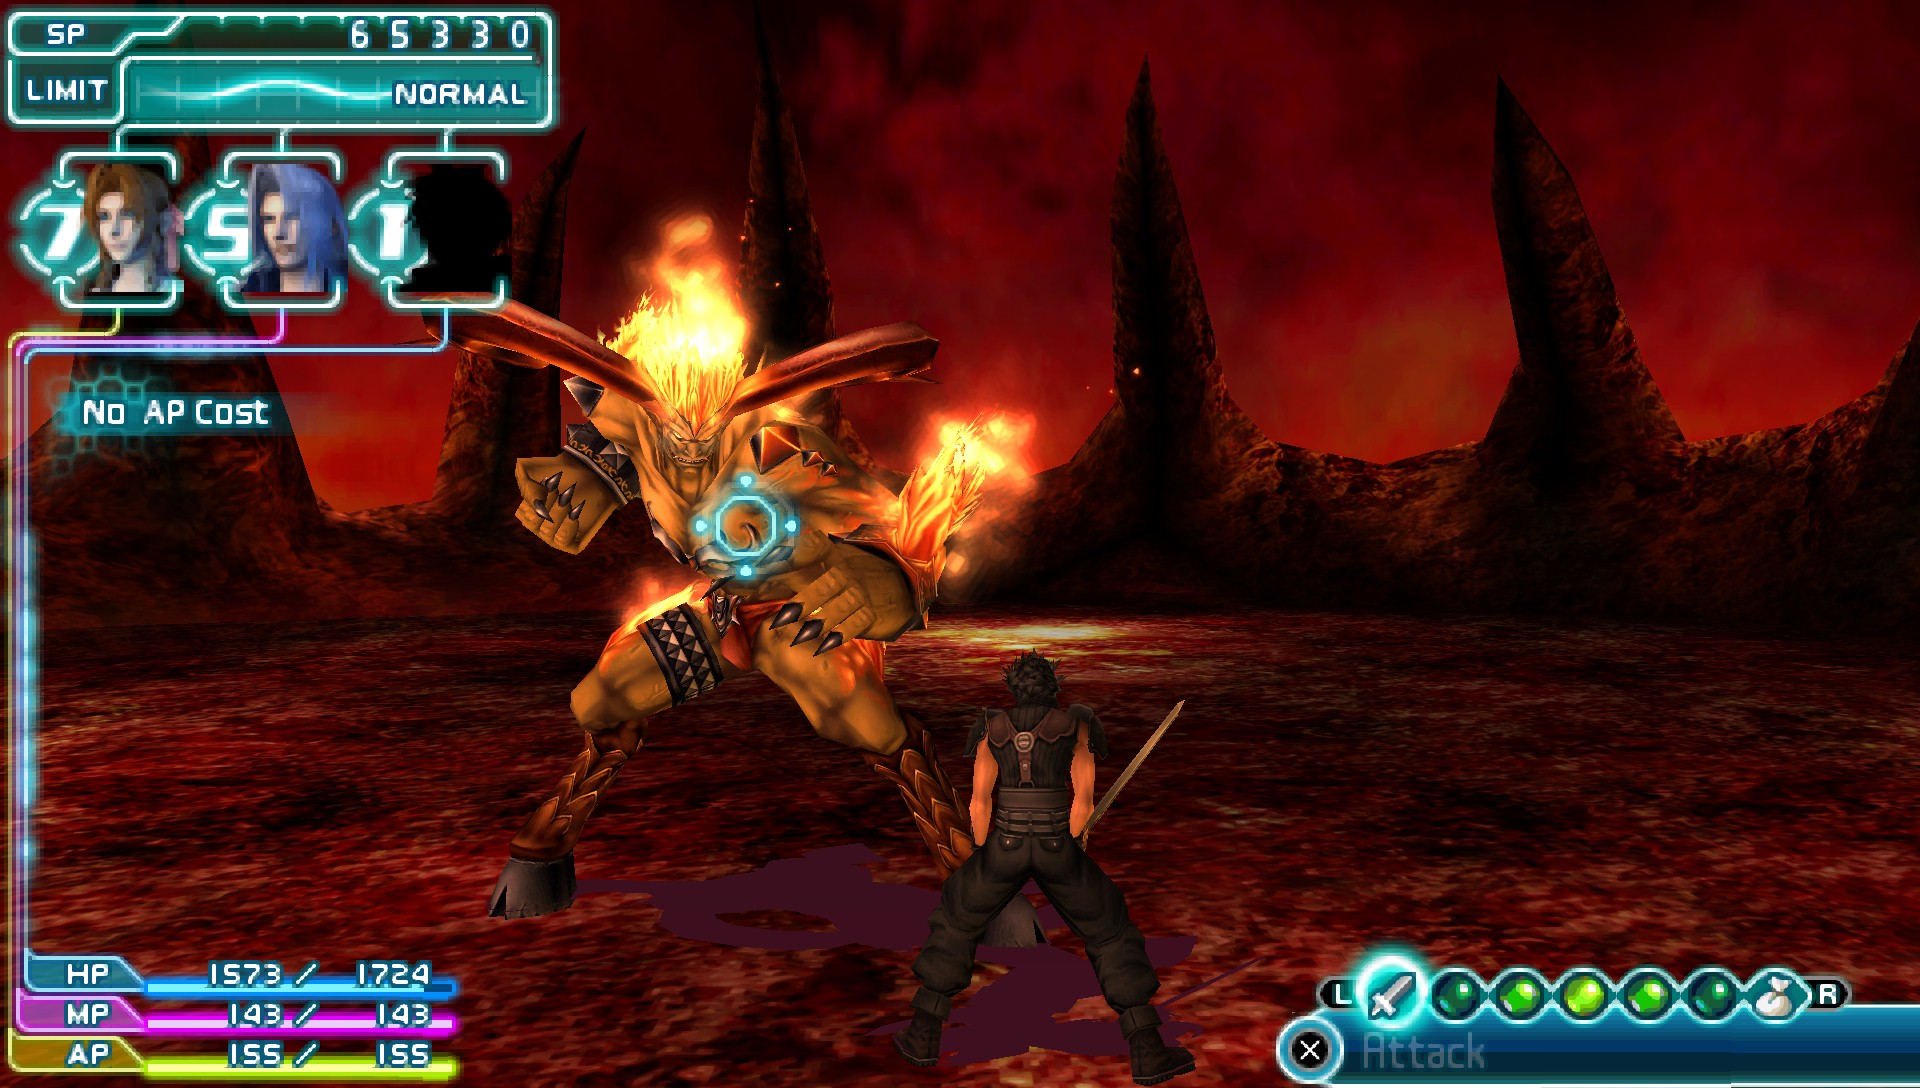 Ppsspp rom download